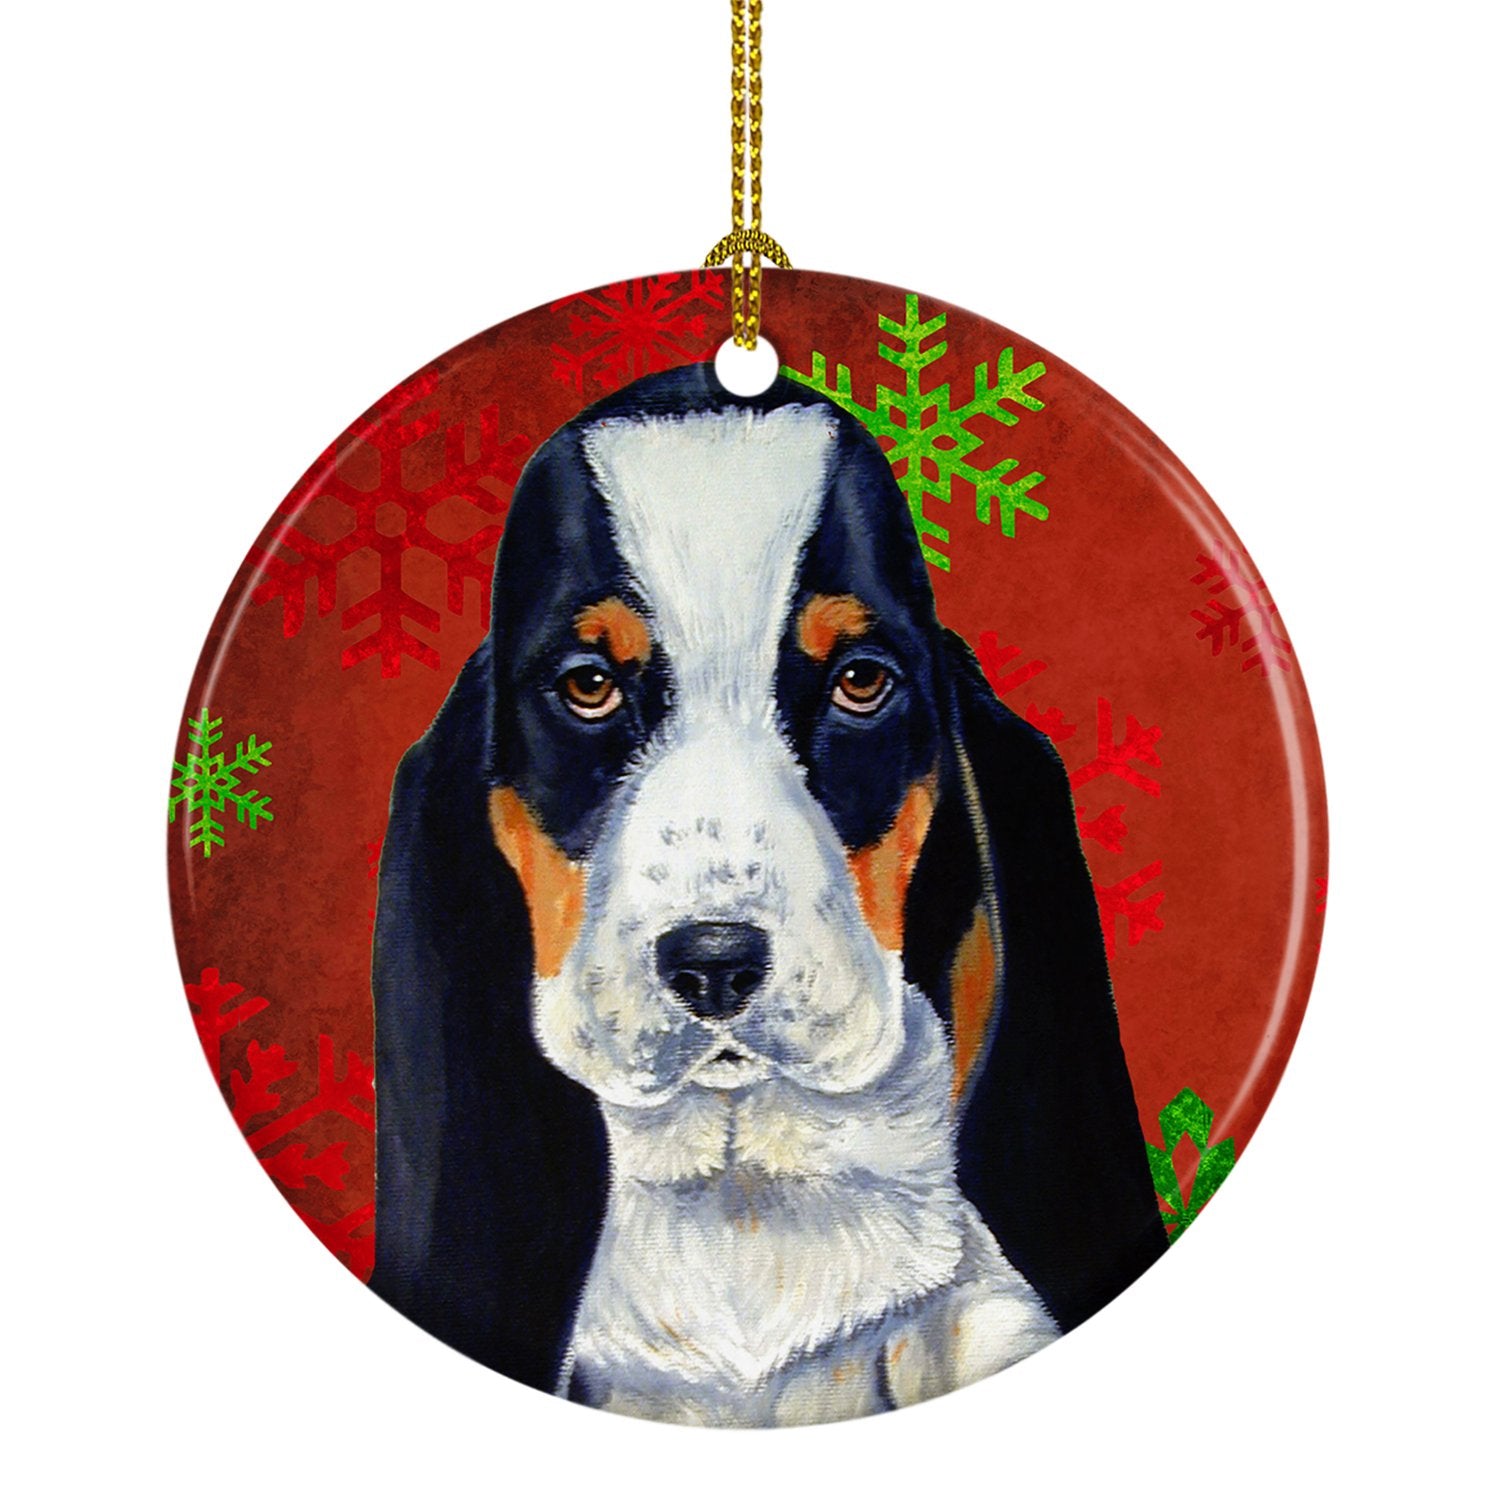 Basset Hound Red Snowflake Holiday Christmas Ceramic Ornament LH9329 by Caroline's Treasures